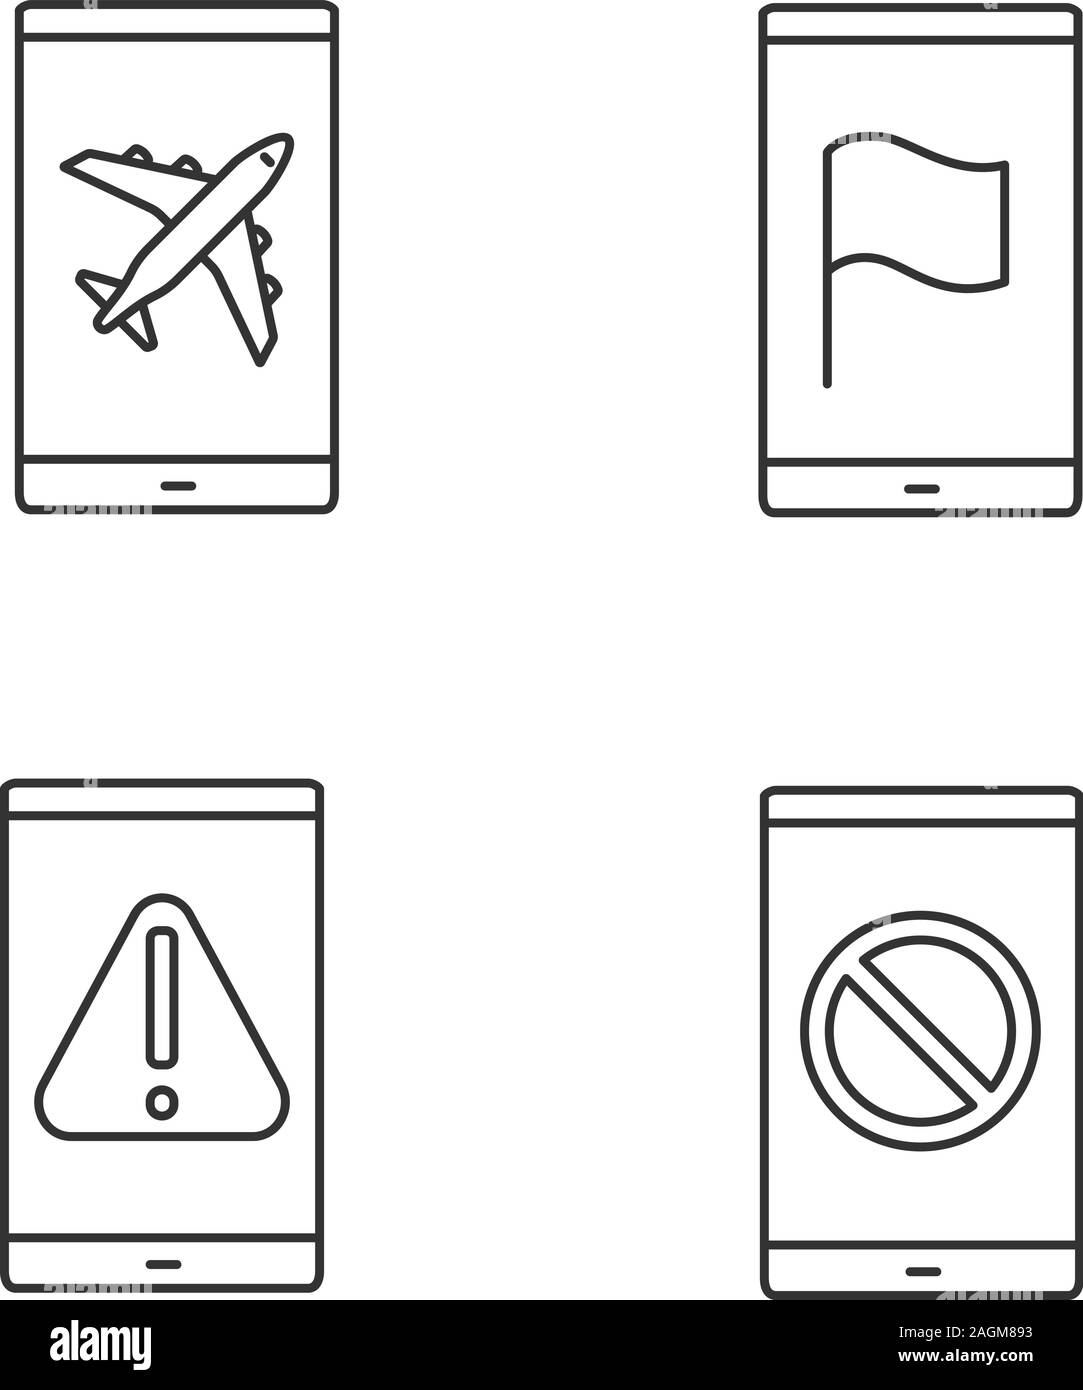 Smartphone apps linear icons set. Flight mode, GPS navigator, error, no signal sign. Thin line contour symbols. Isolated vector outline illustrations Stock Vector